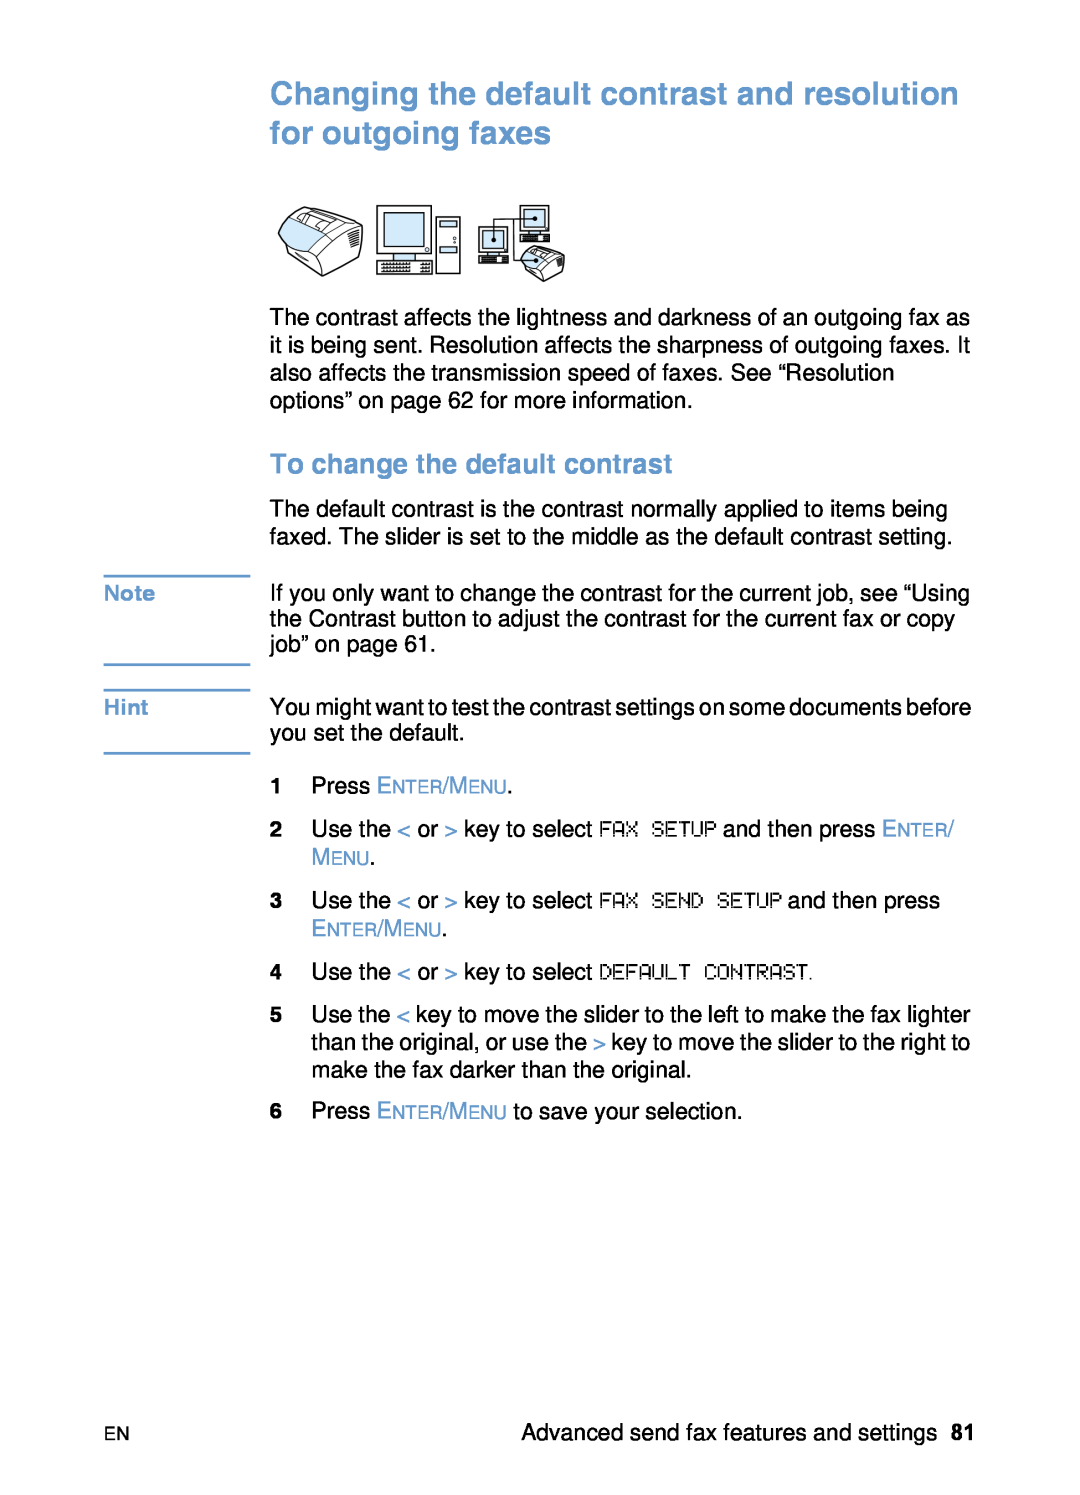 HP 3200 manual Changing the default contrast and resolution for outgoing faxes, To change the default contrast, Hint 